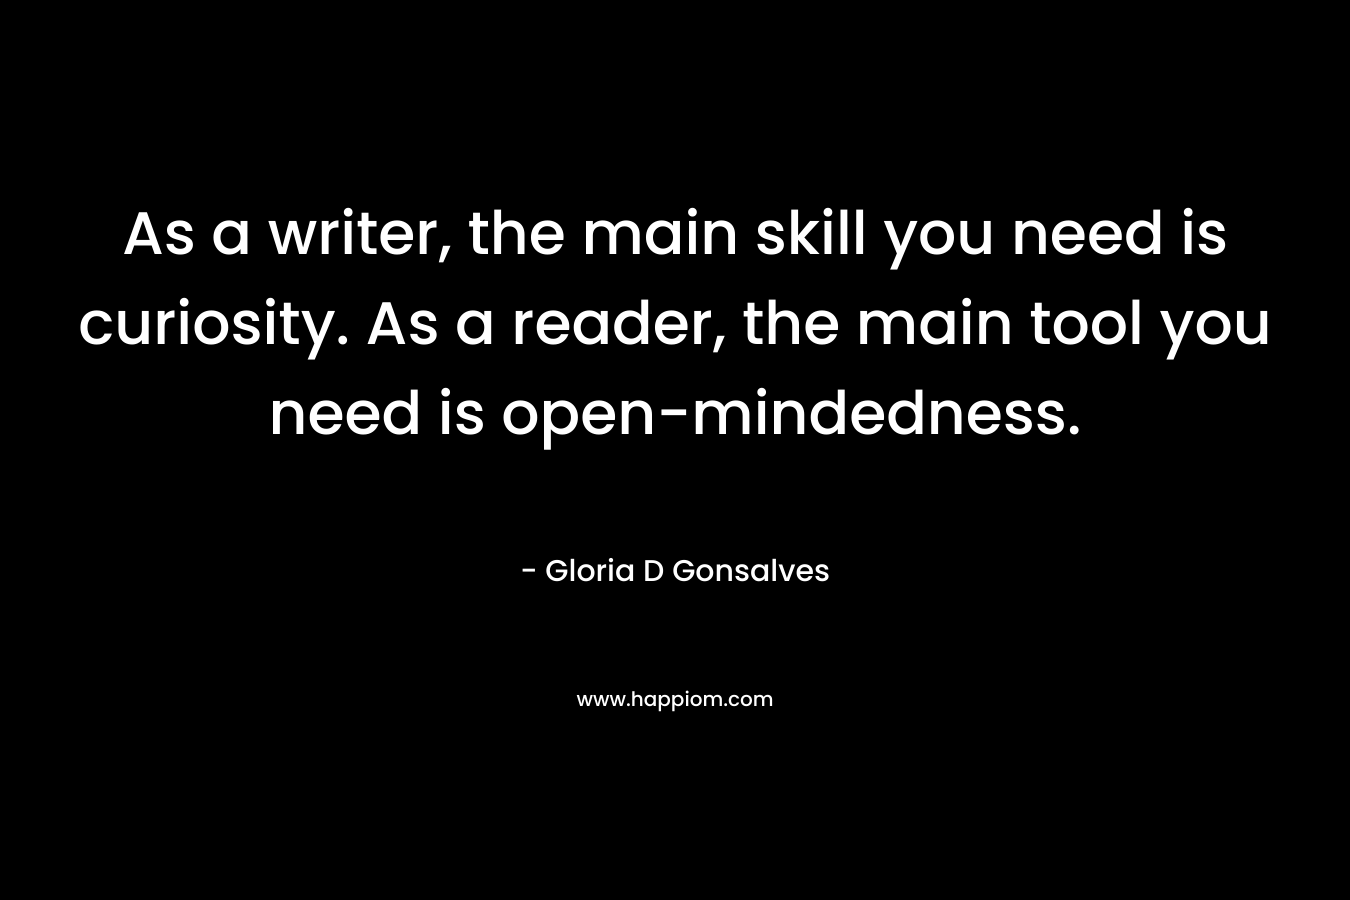 As a writer, the main skill you need is curiosity. As a reader, the main tool you need is open-mindedness. – Gloria D Gonsalves